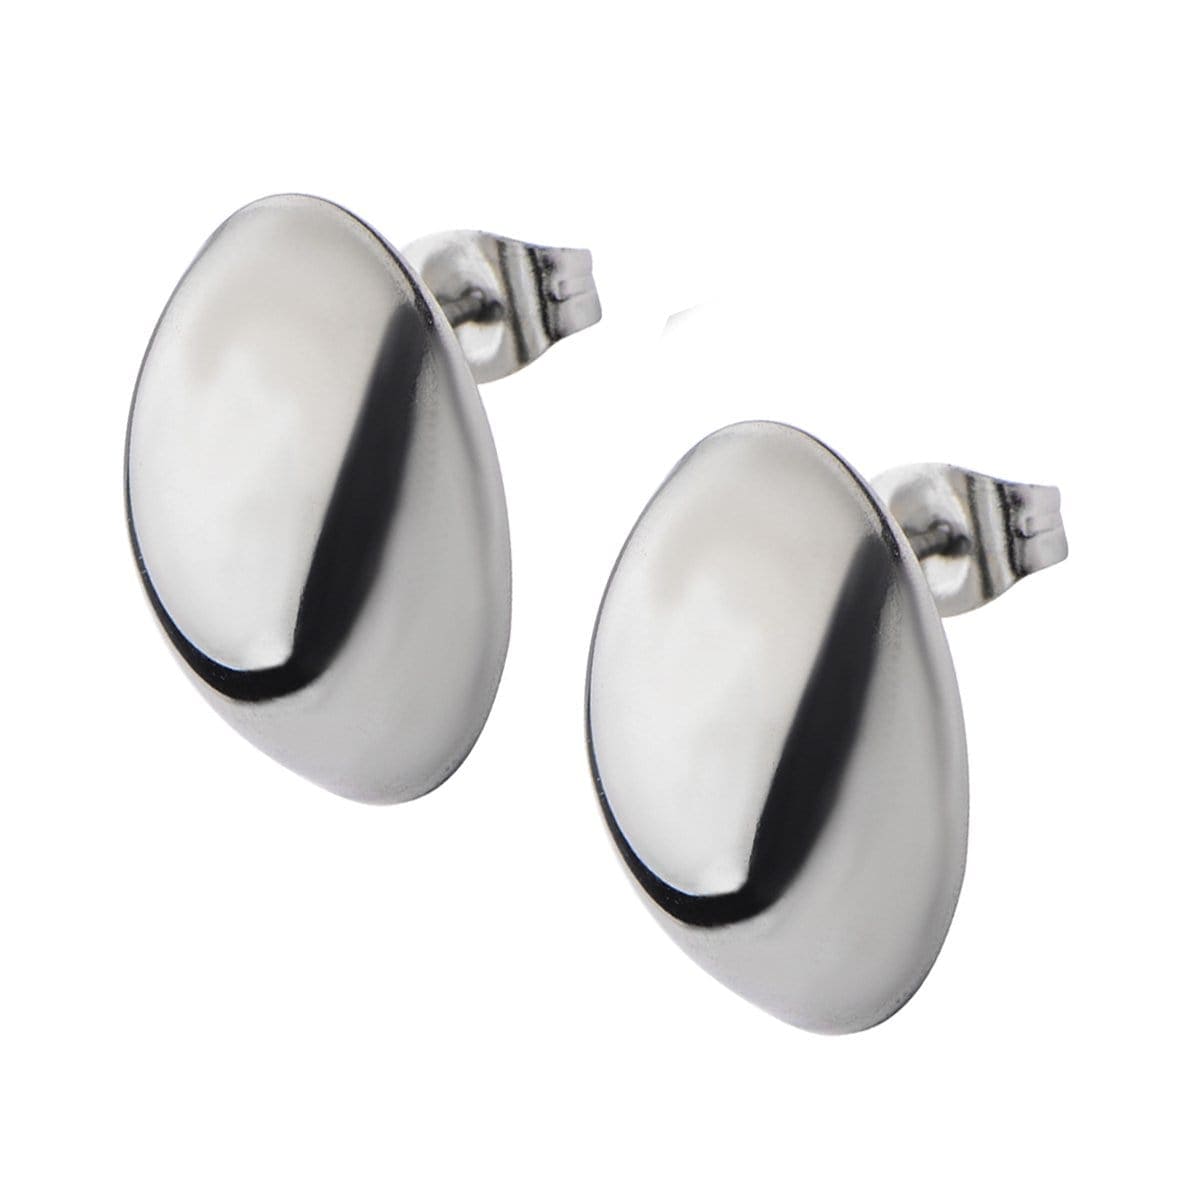 INOX JEWELRY Earrings Silver Tone Stainless Steel Large Oval Dome Studs SSE4813